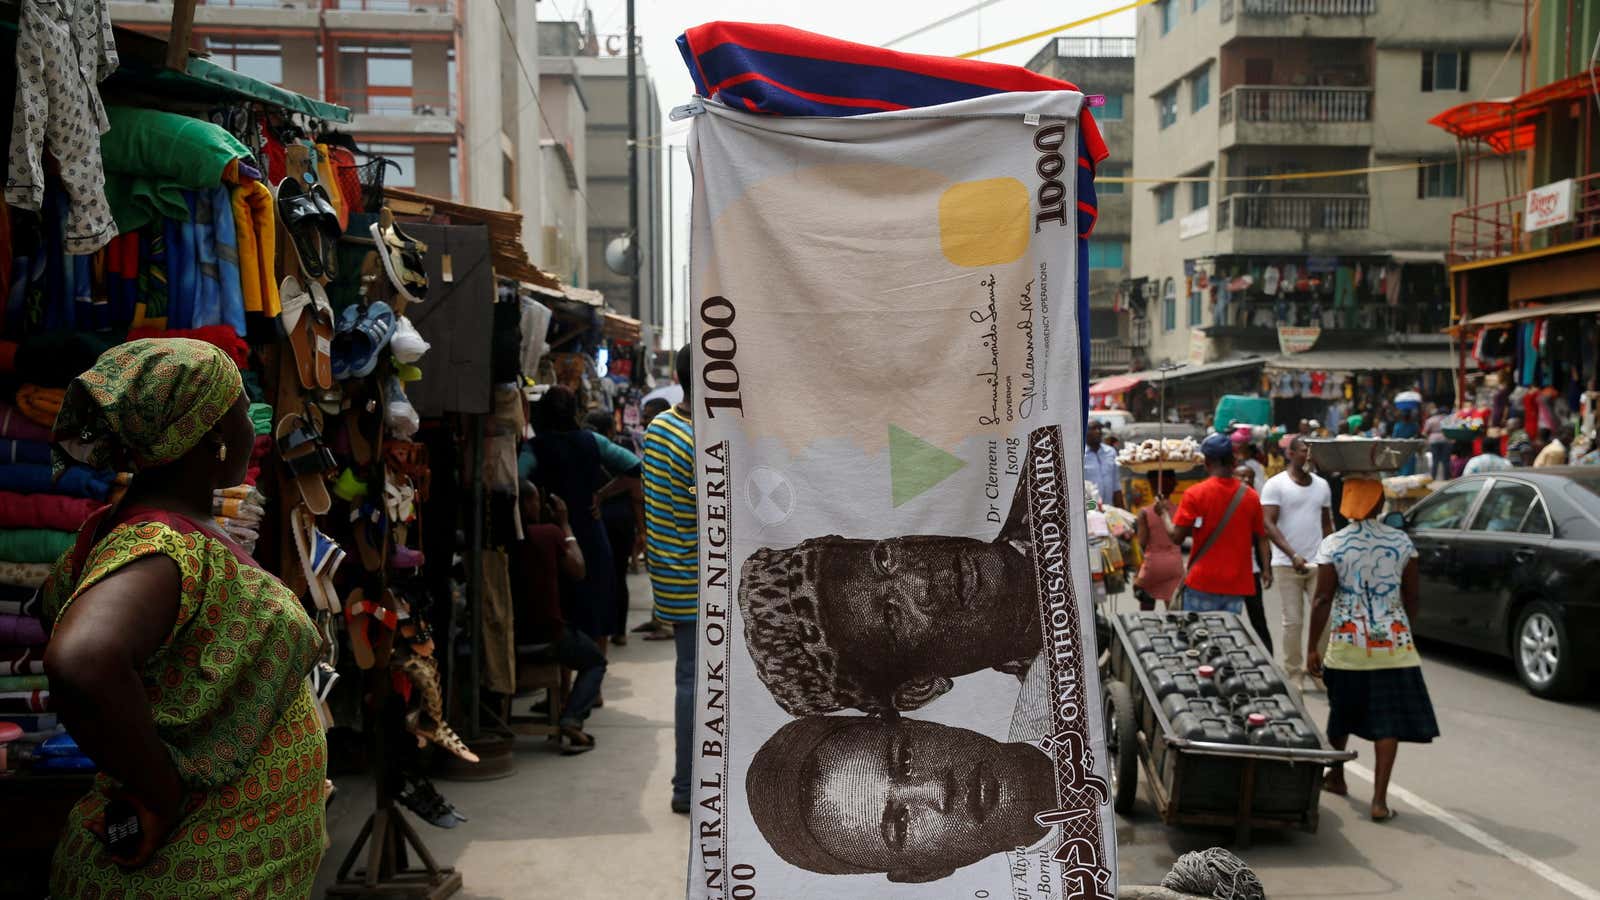 A weakening naira drives up interest for dollar-denominated investments in Nigeria